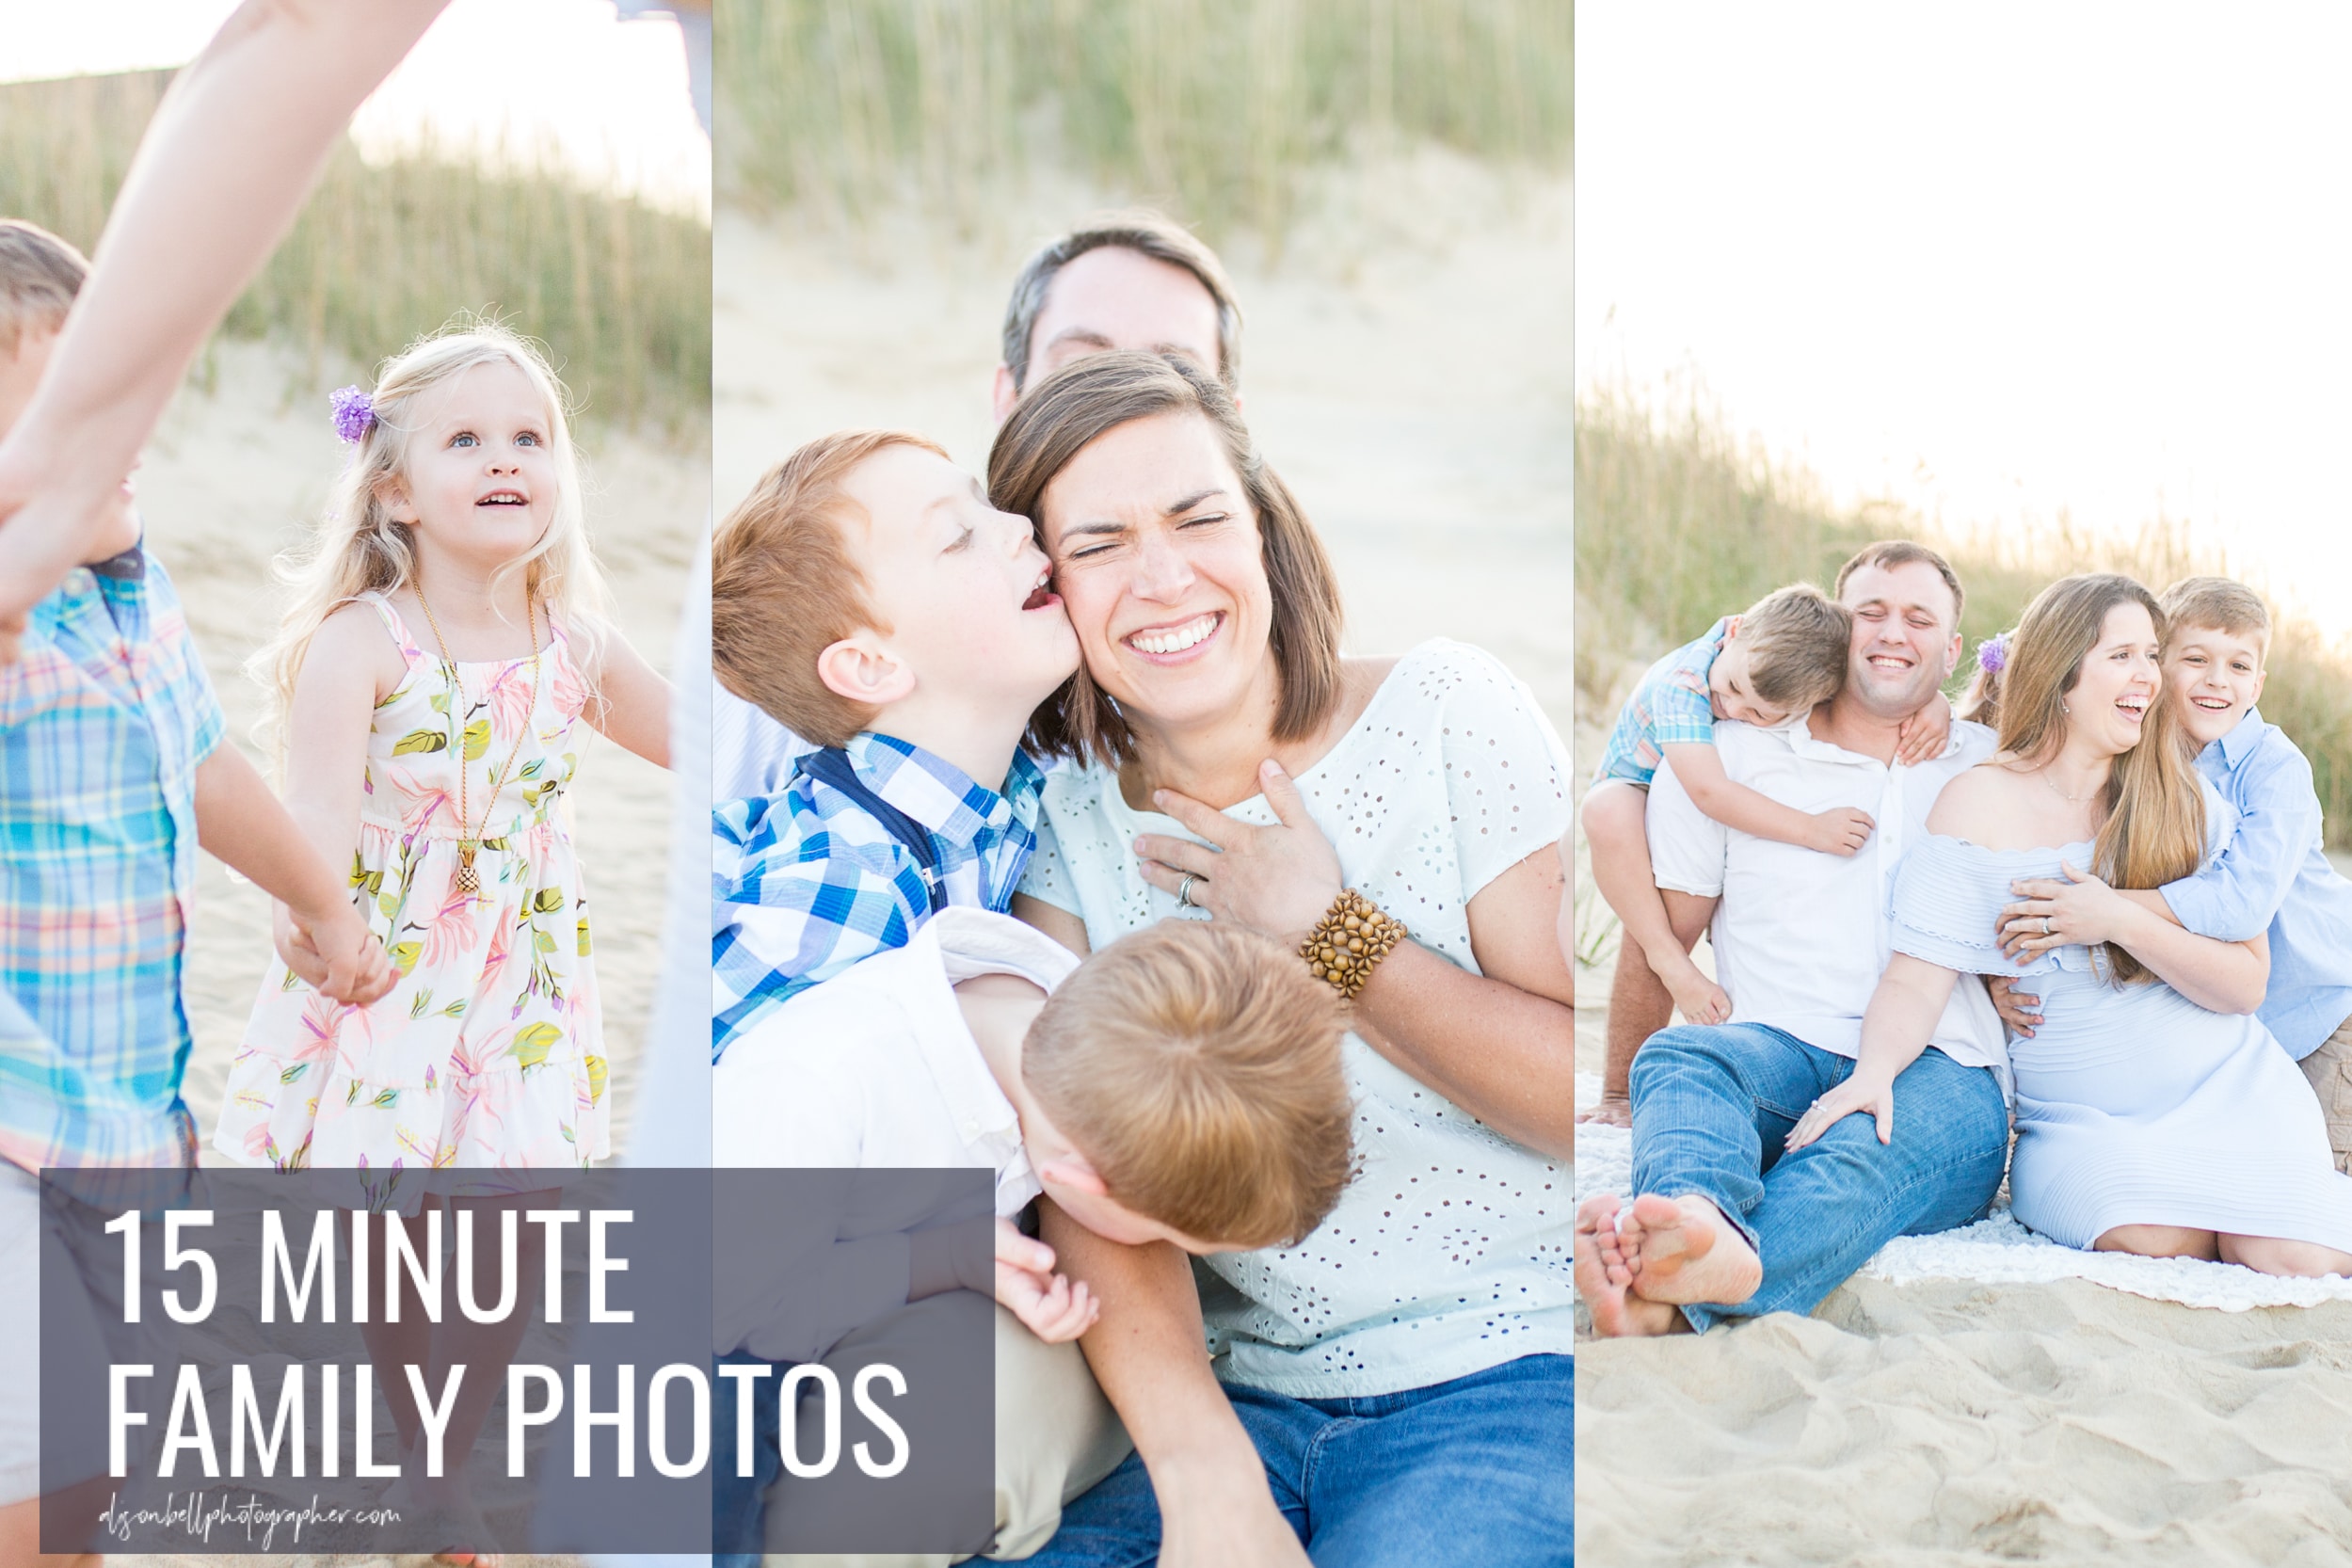 East beach Norfolk mini family photo session by alison bell photographer